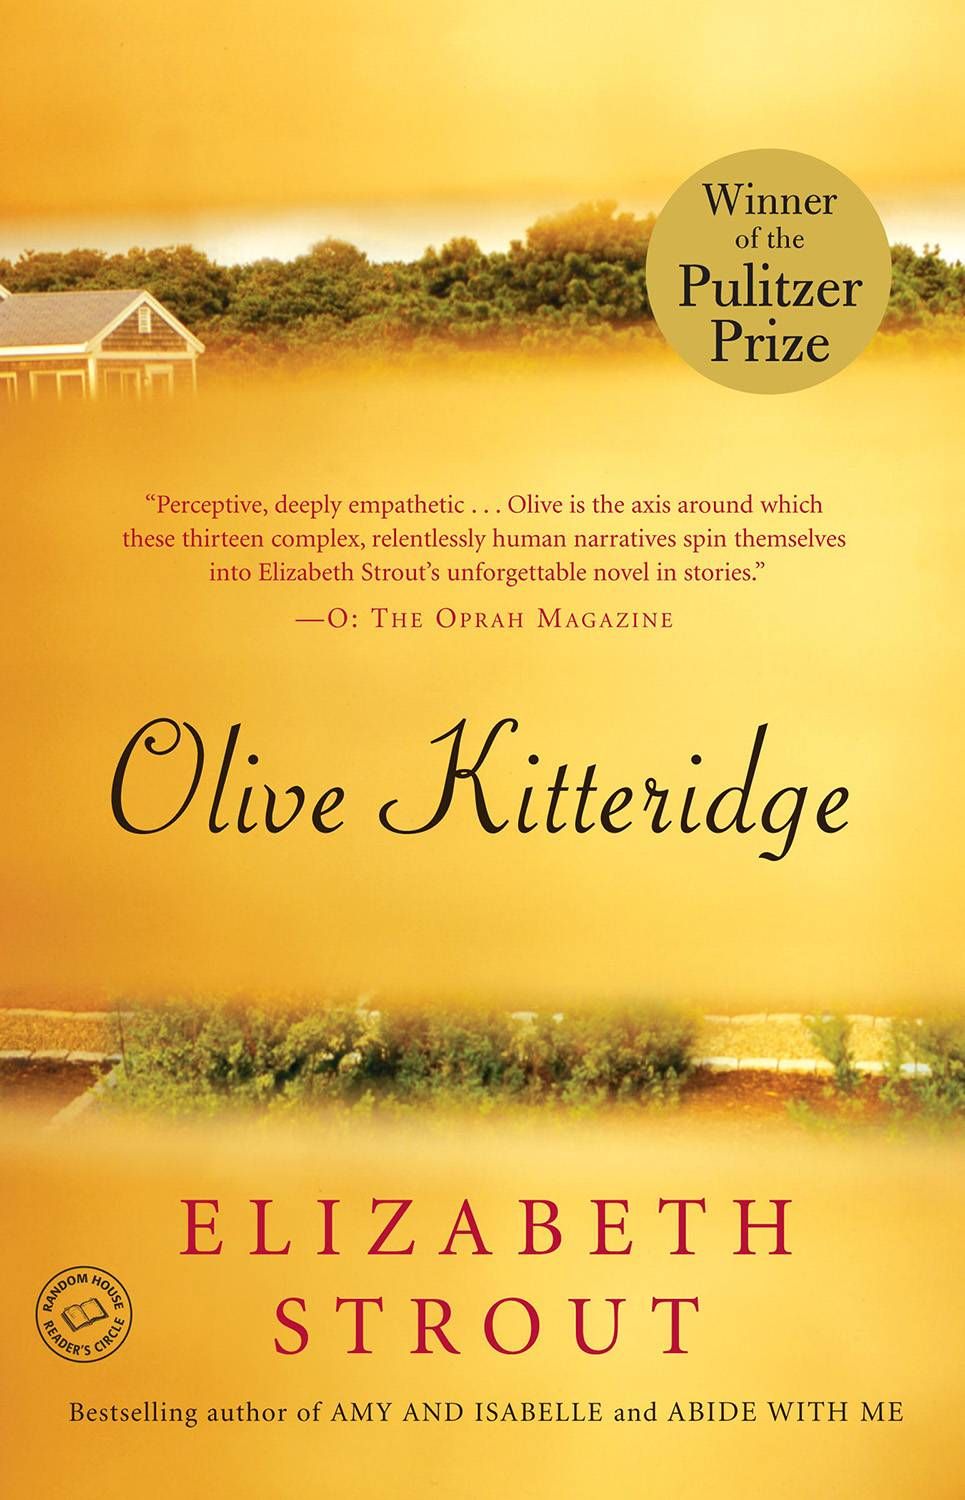 Olive Kitteridge by Elizabeth Strout - book cover